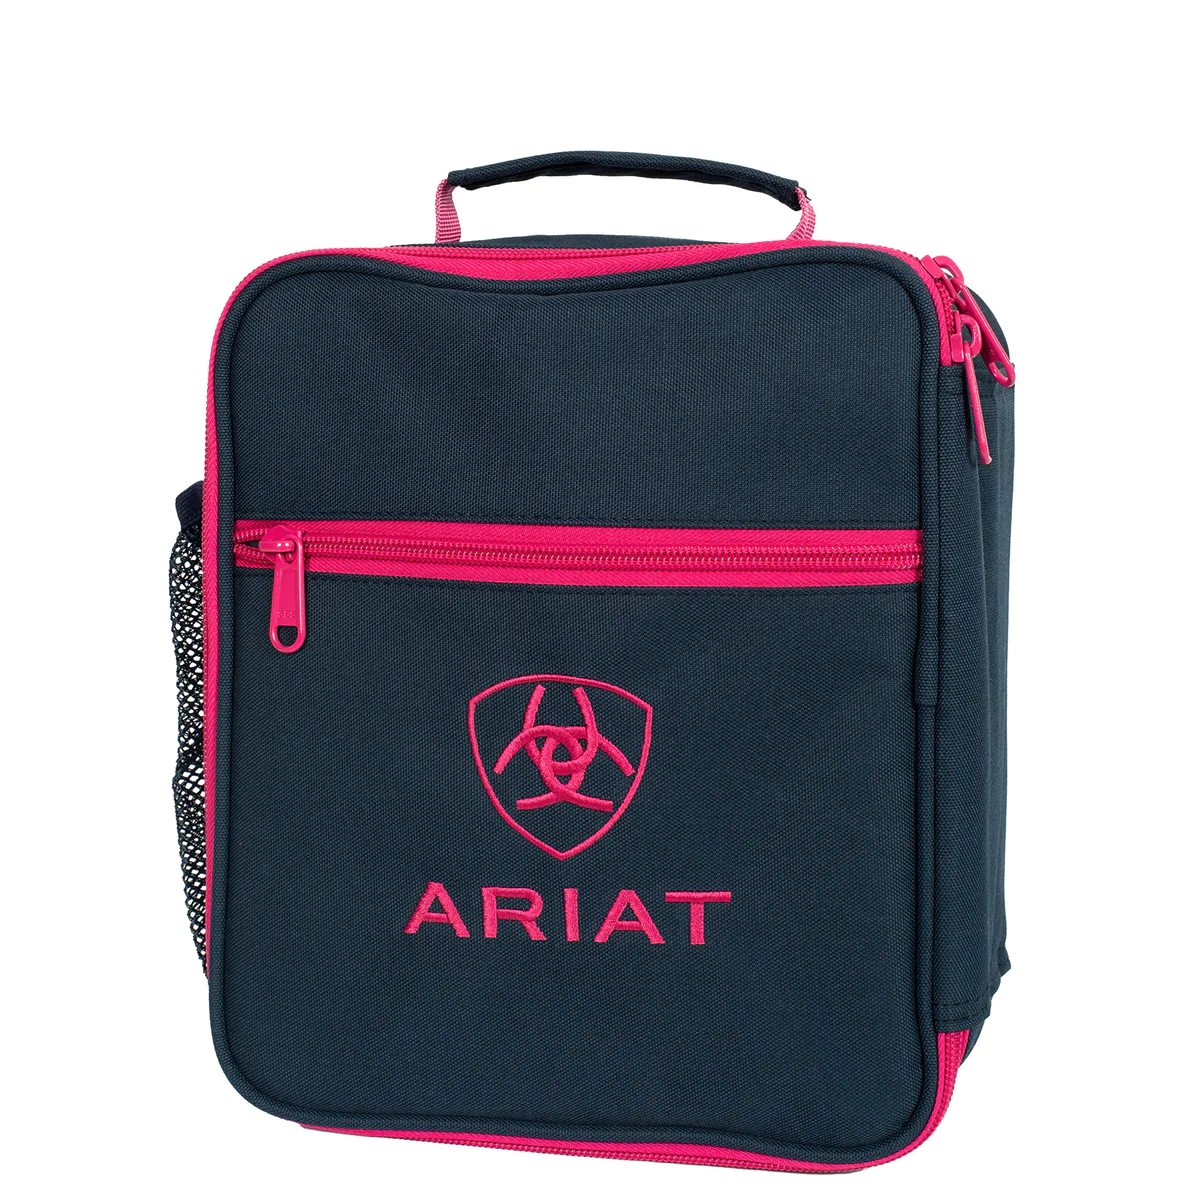 Ariat Lunch Box-Pink